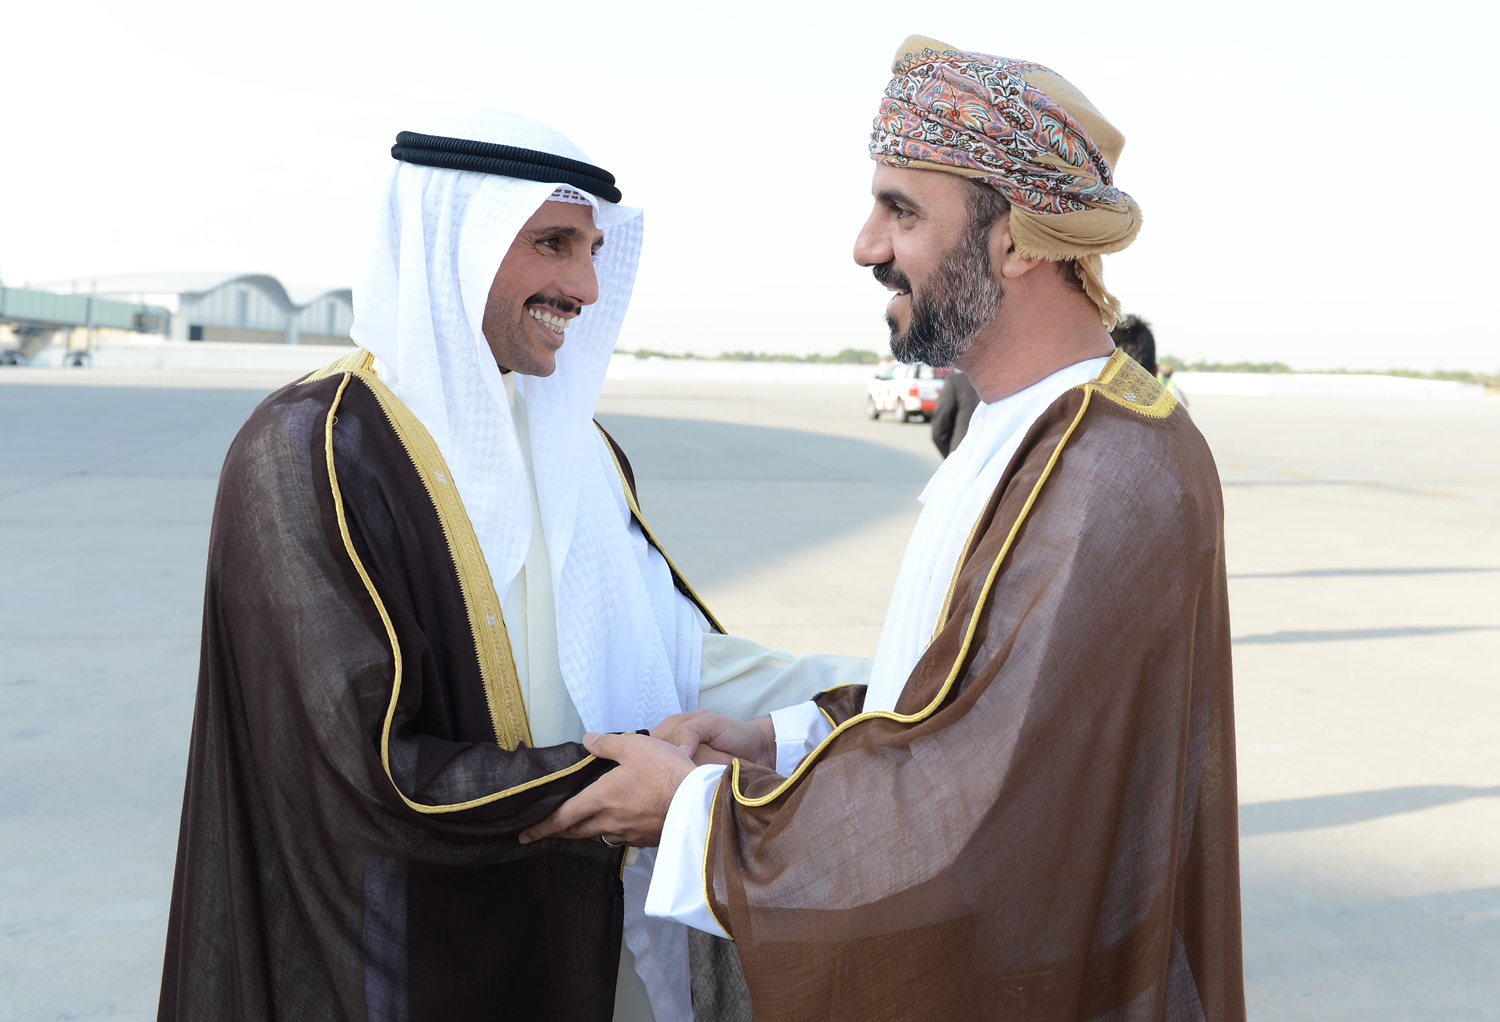 Omani Consultative Assembly Speaker Khalid Al-Mawali arrives in Kuwait during the invitation of National Assembly Speaker Marzouq Al-Ghanim